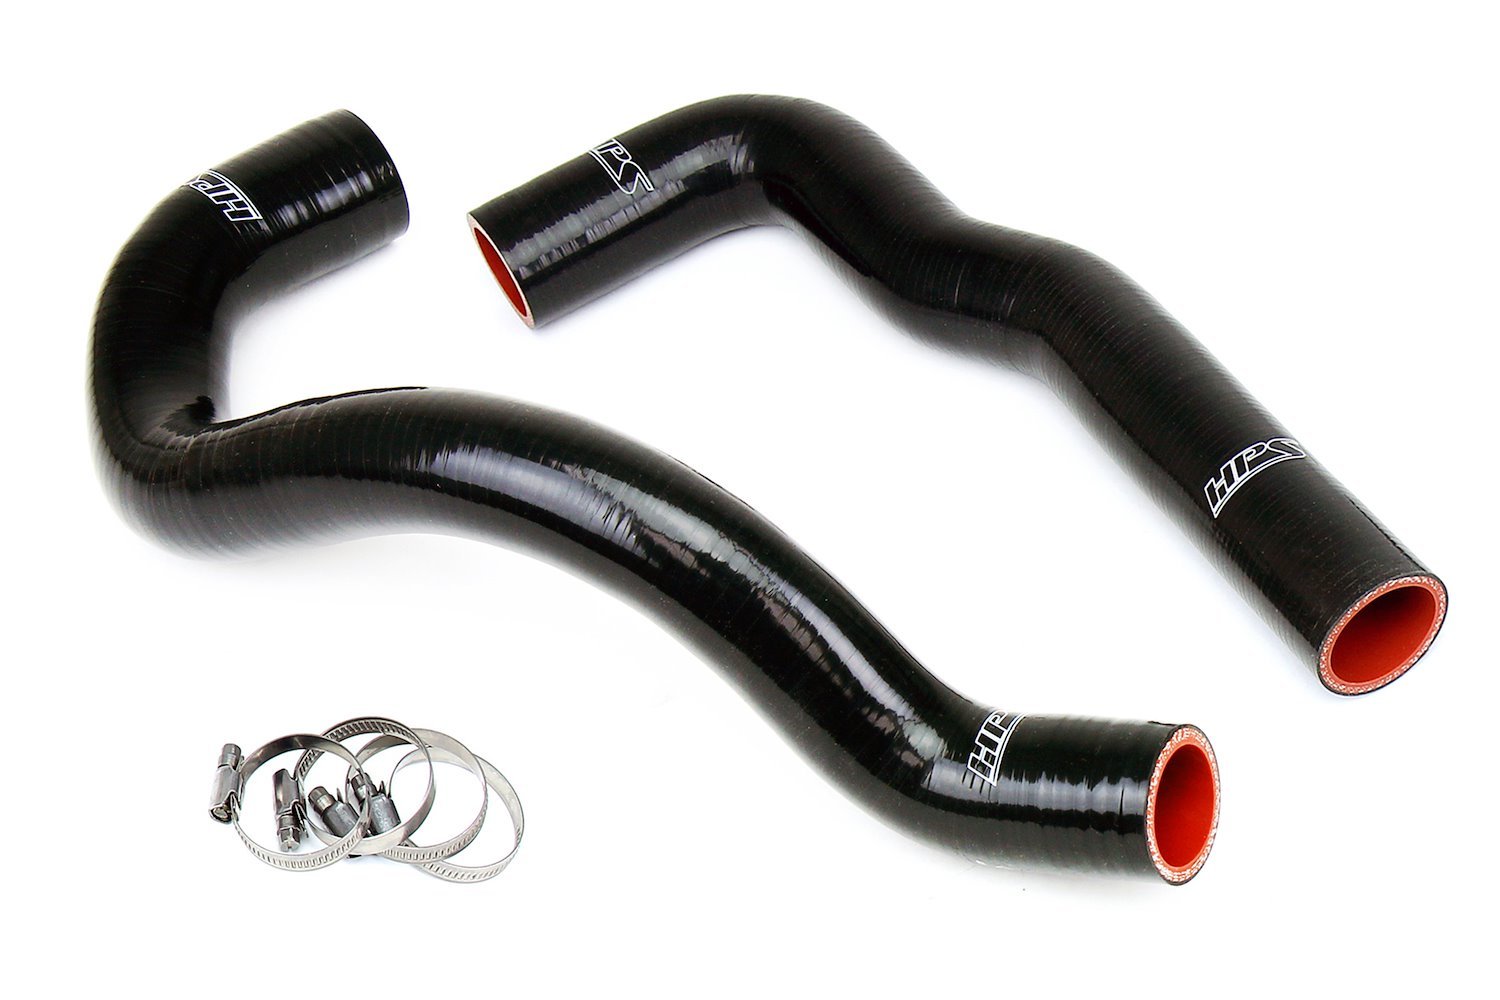 57-2066-BLK Radiator Hose Kit, 3-Ply Reinforced Silicone, Replaces Rubber Radiator Coolant Hoses